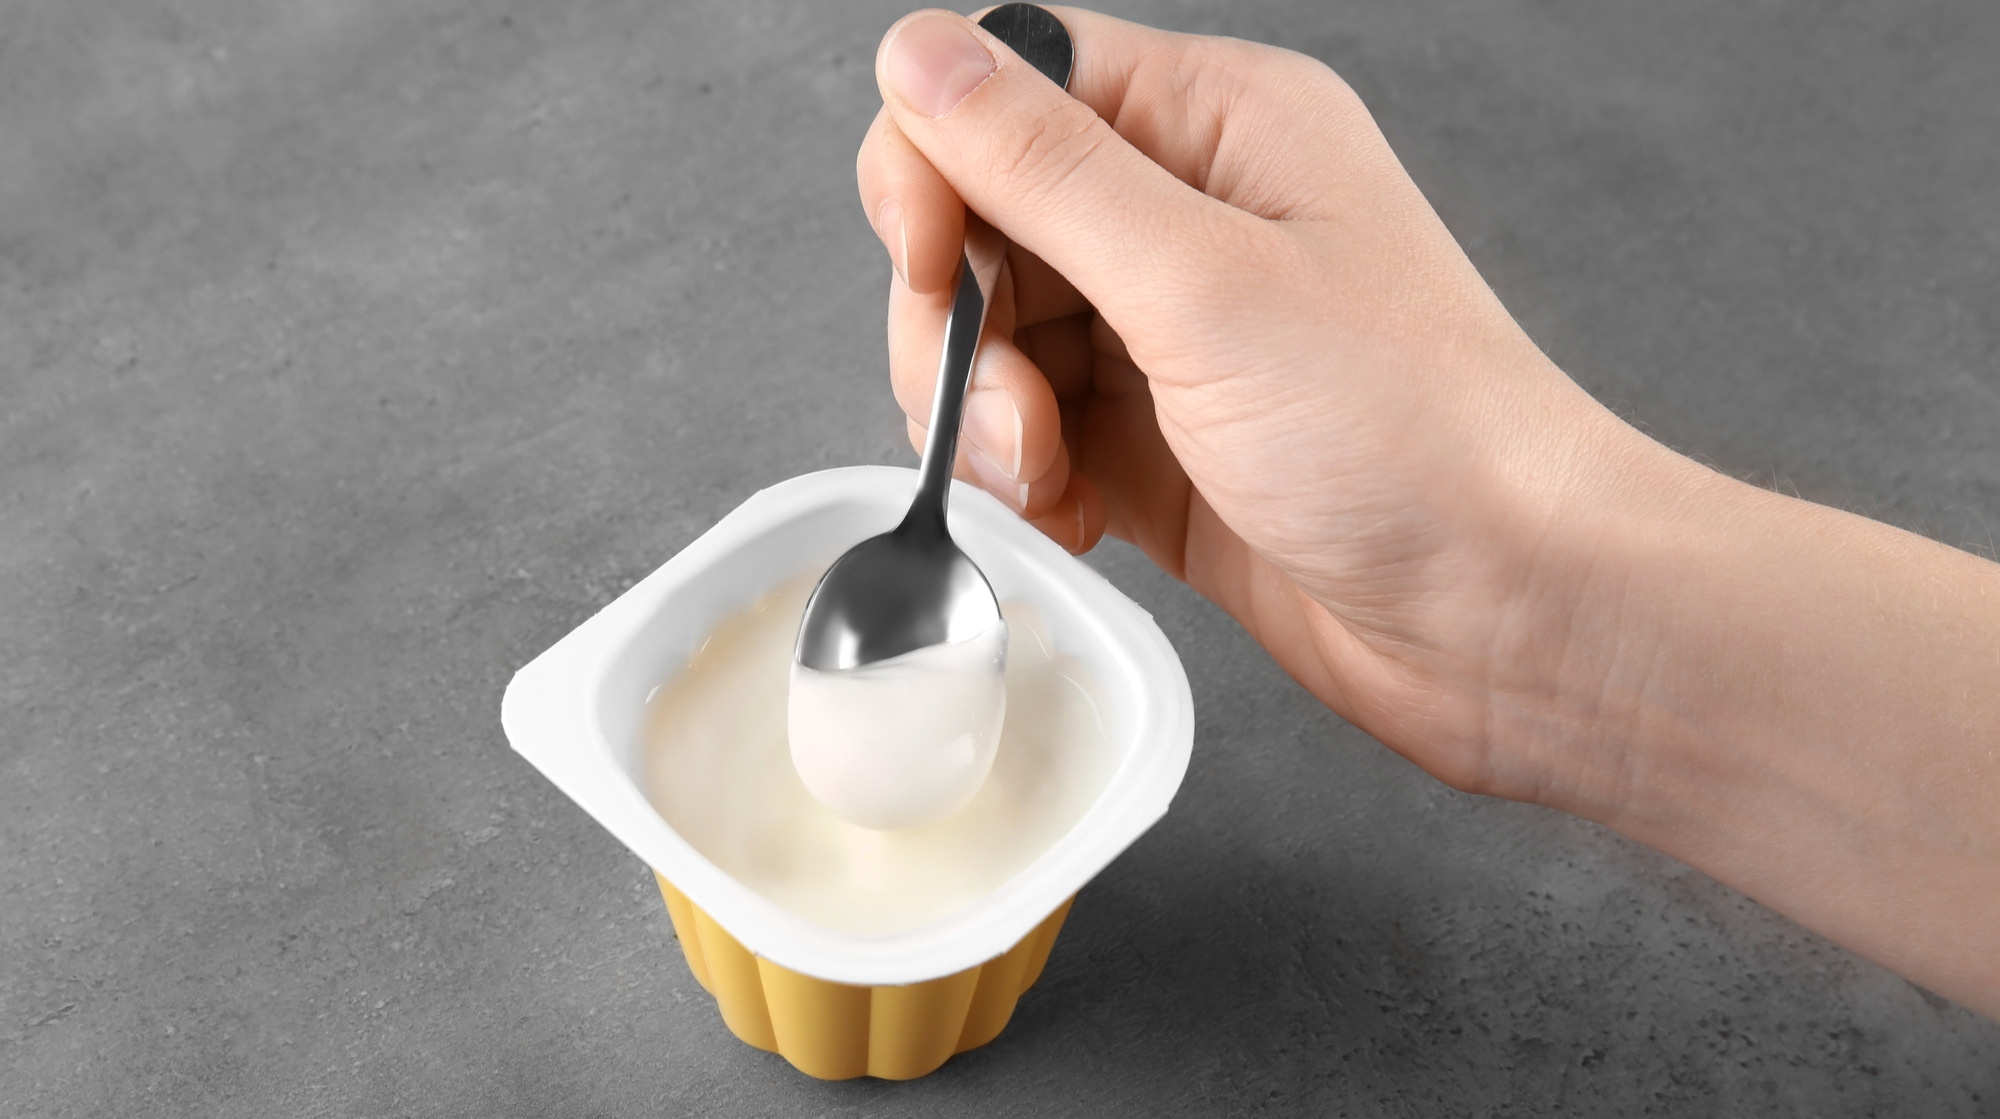 In the US, yogurt manufacturers have been allowed to state on their packaging that their products can prevent type 2 diabetes